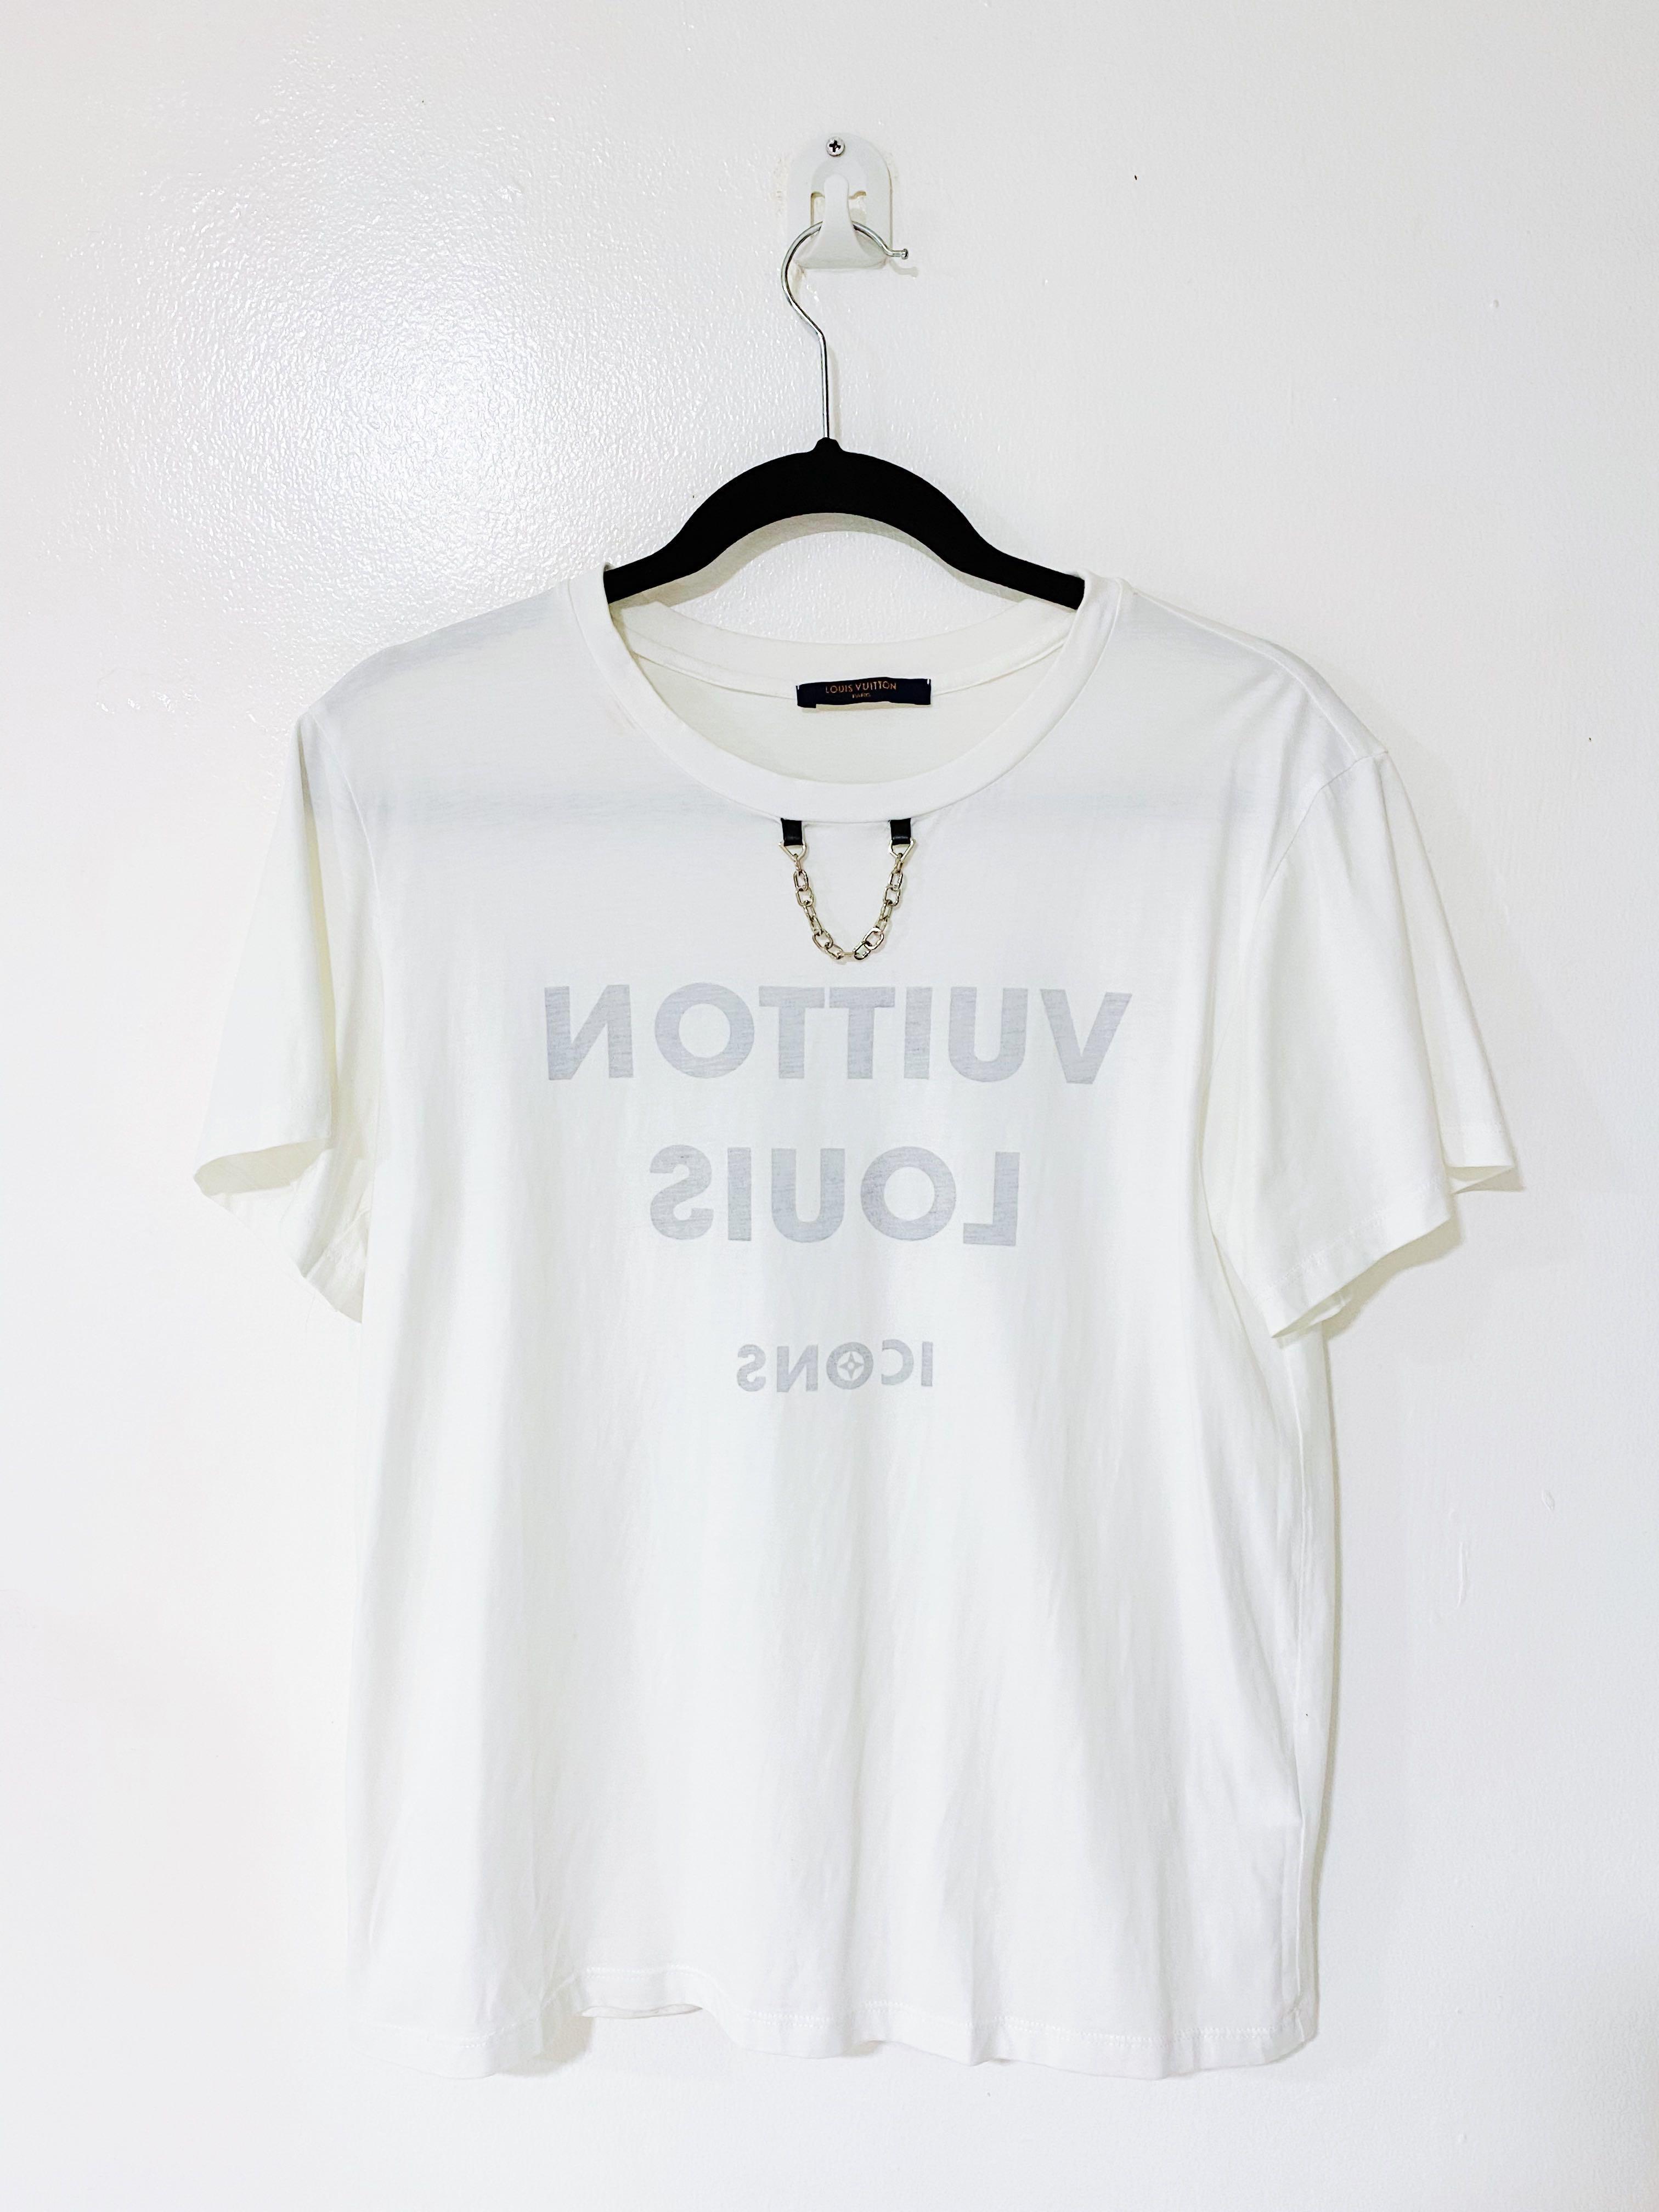 Louis Vuitton 2021 Icons Inside Out T-Shirt - White Tops, Clothing -  LOU795629